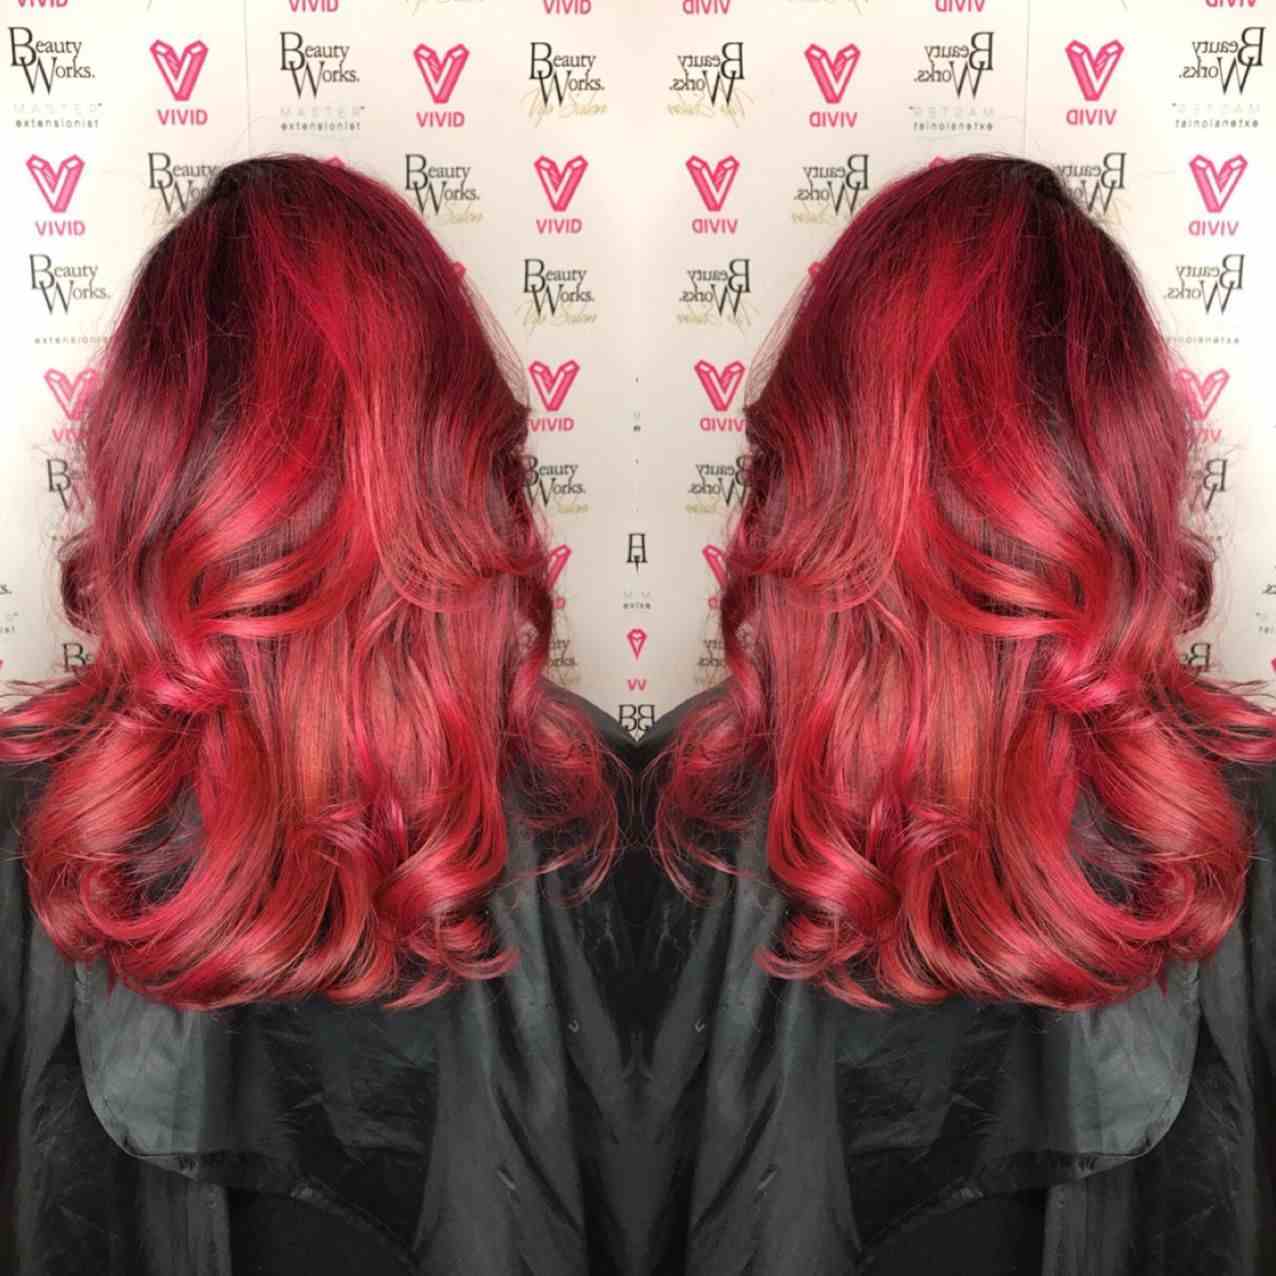 Bright Red Hair Color Hair Trends Women Balayage Red